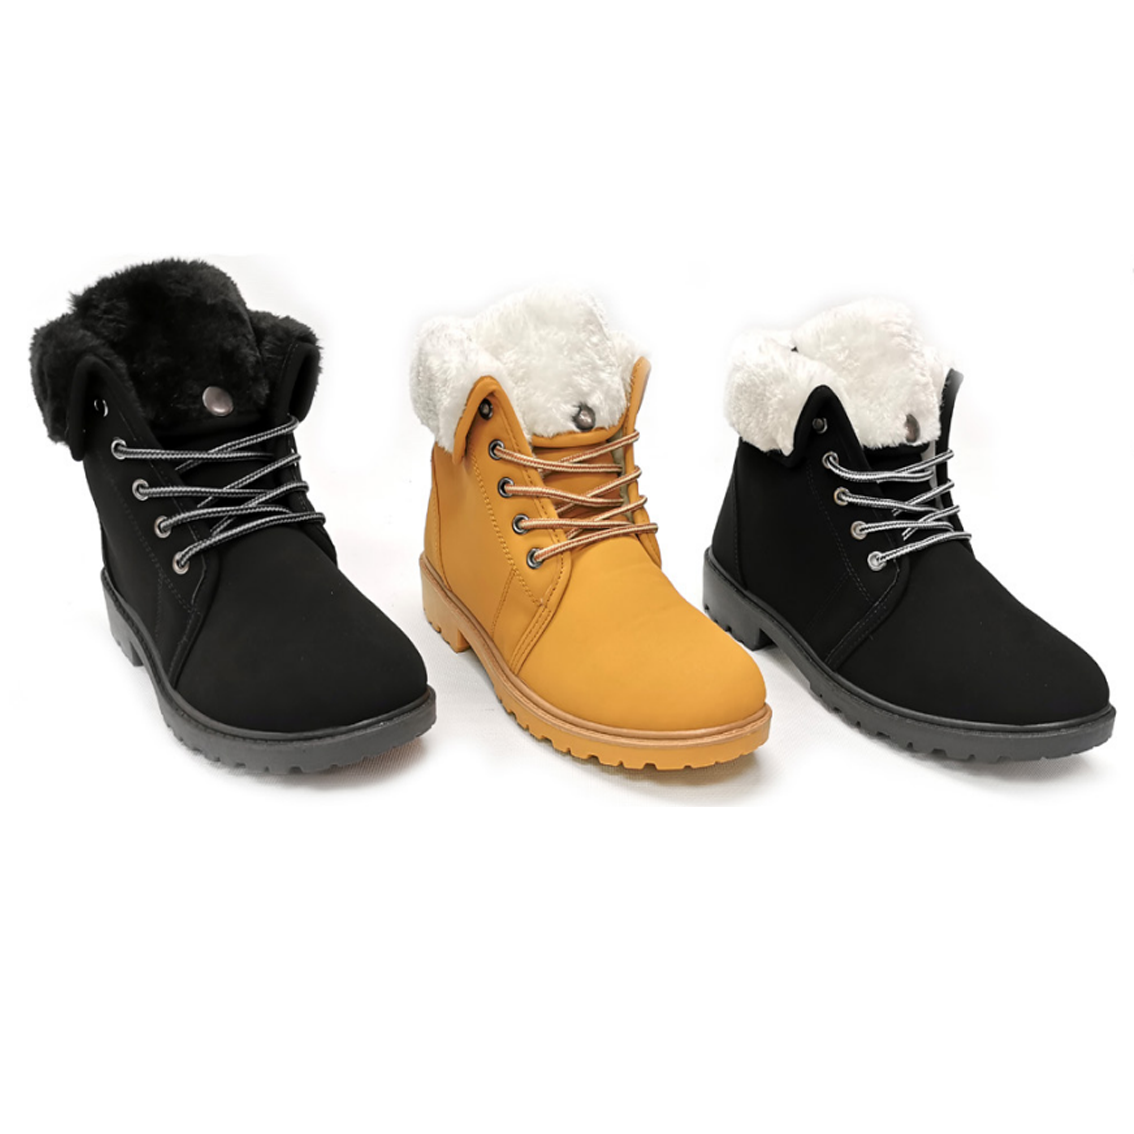 Wholesale Women's Boots Lace Up Winter Style Shoes Cadence NPE26